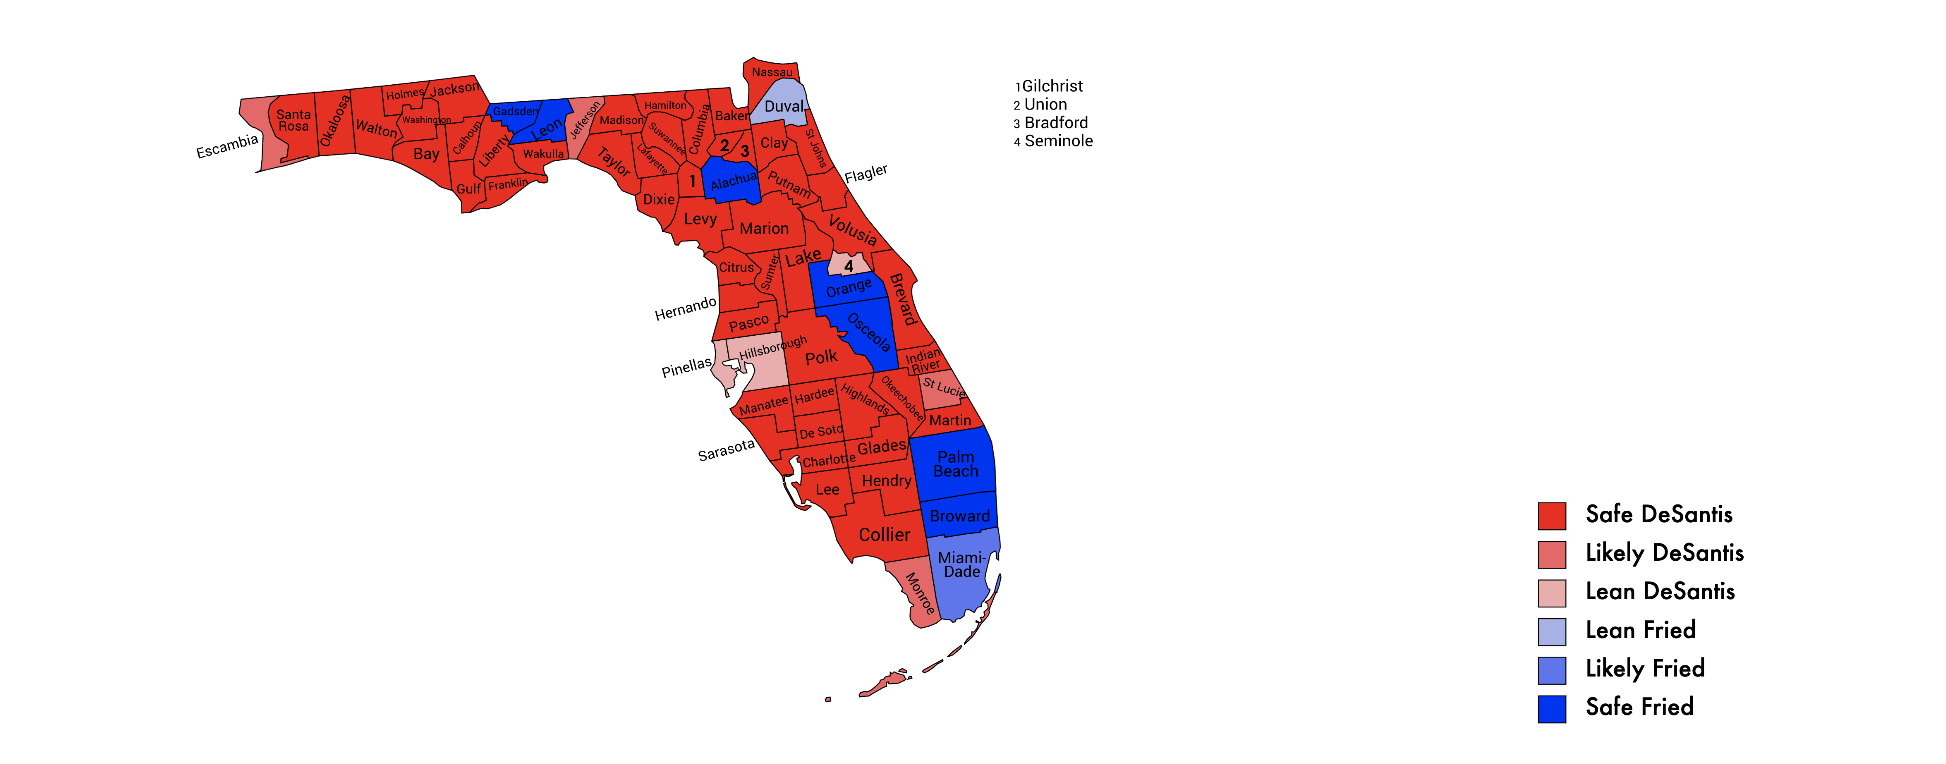 A Brief Look At Florida s 2022 Key Races Rubio More Vulnerable Than 